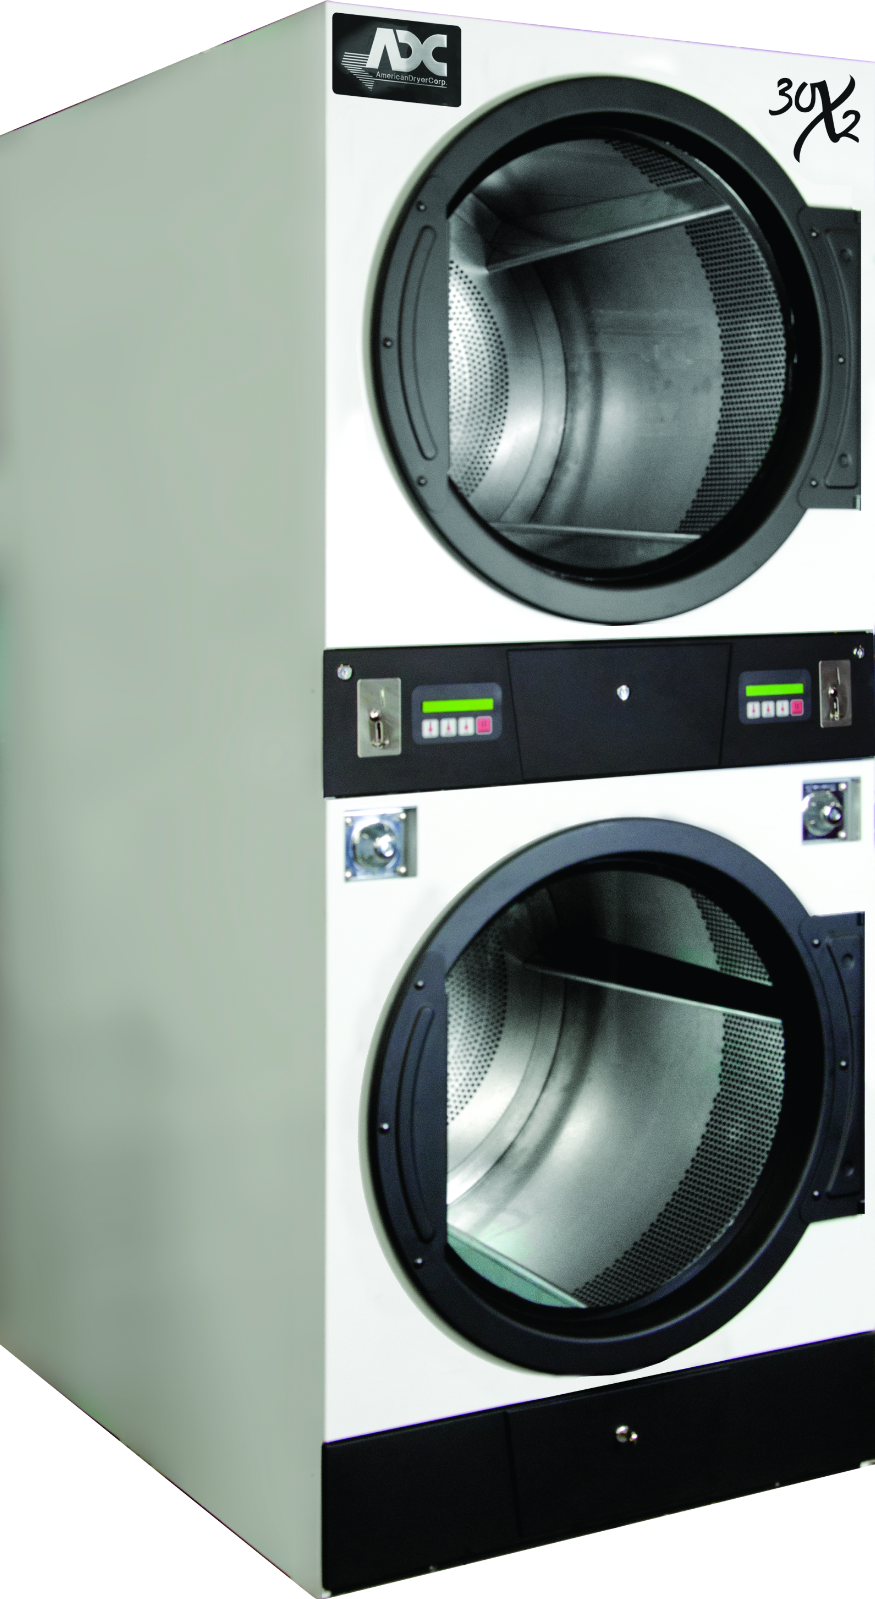 Recalled ADC Brand Commercial Dryer Model ADG-30X2 (coin-operated configuration)